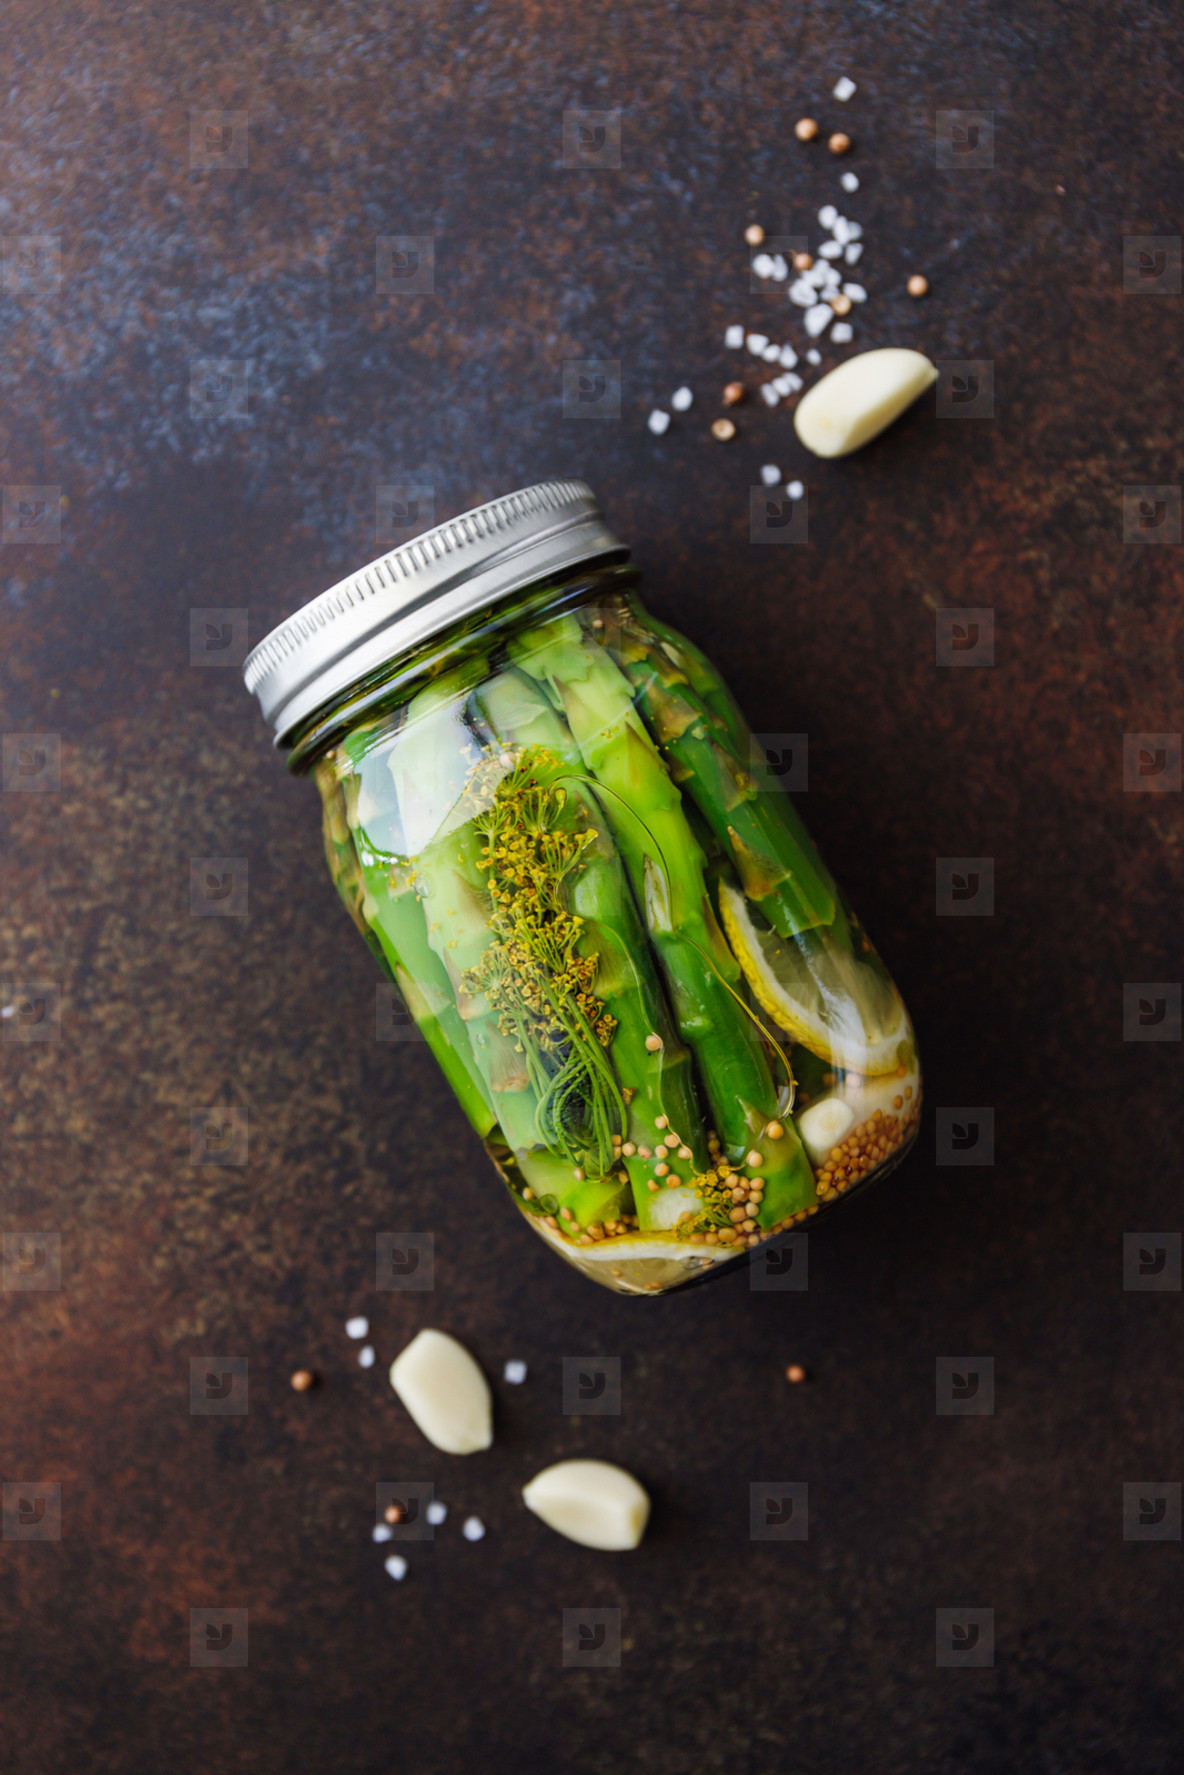 Top view of pickled asparagus in a jar  Seasonal canning vegetable recipe